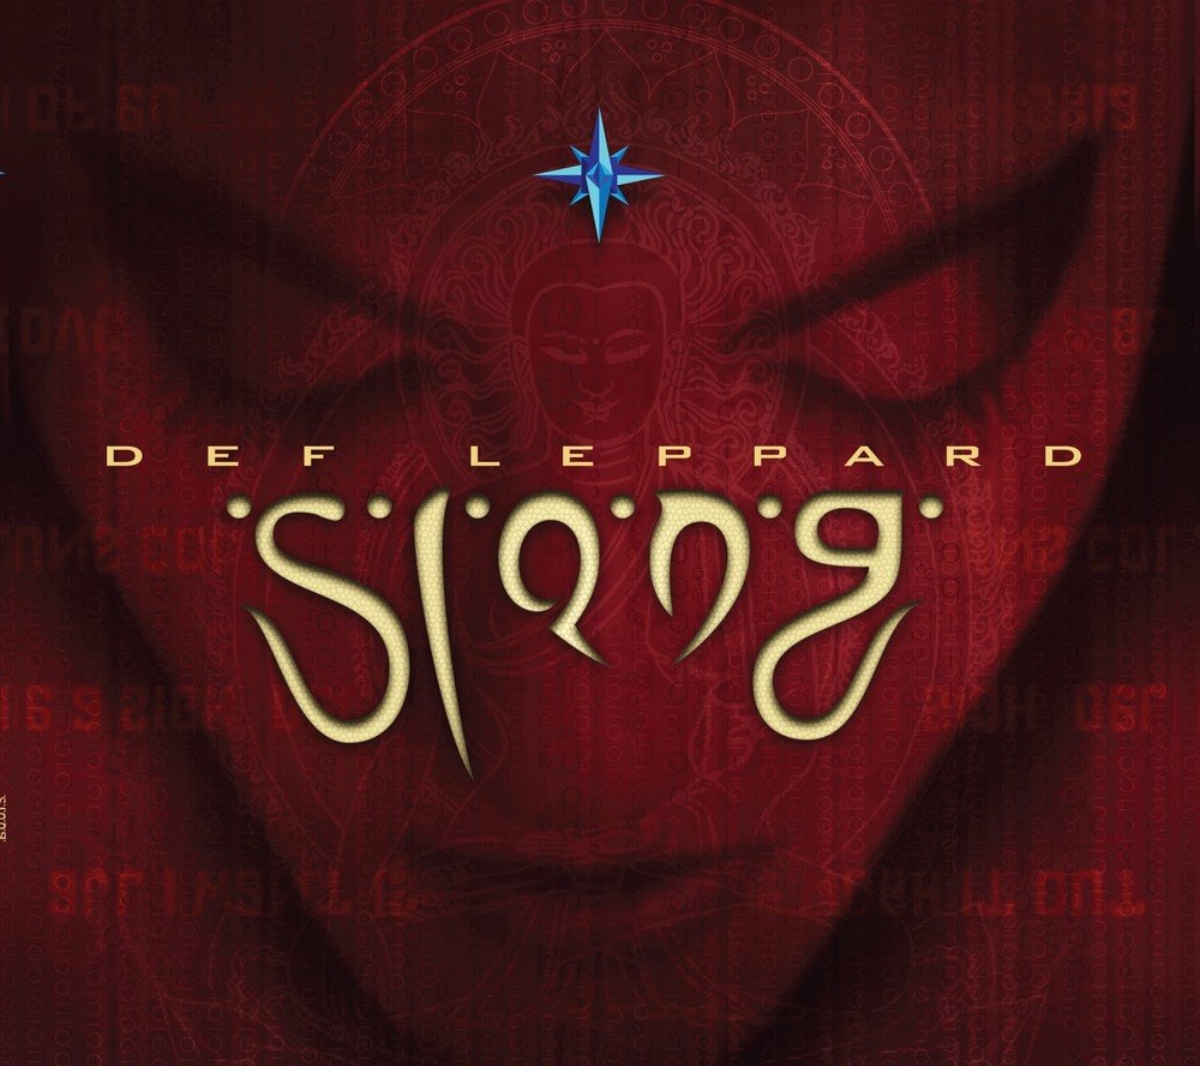 Cover of the album "Slang" by Def Leppard